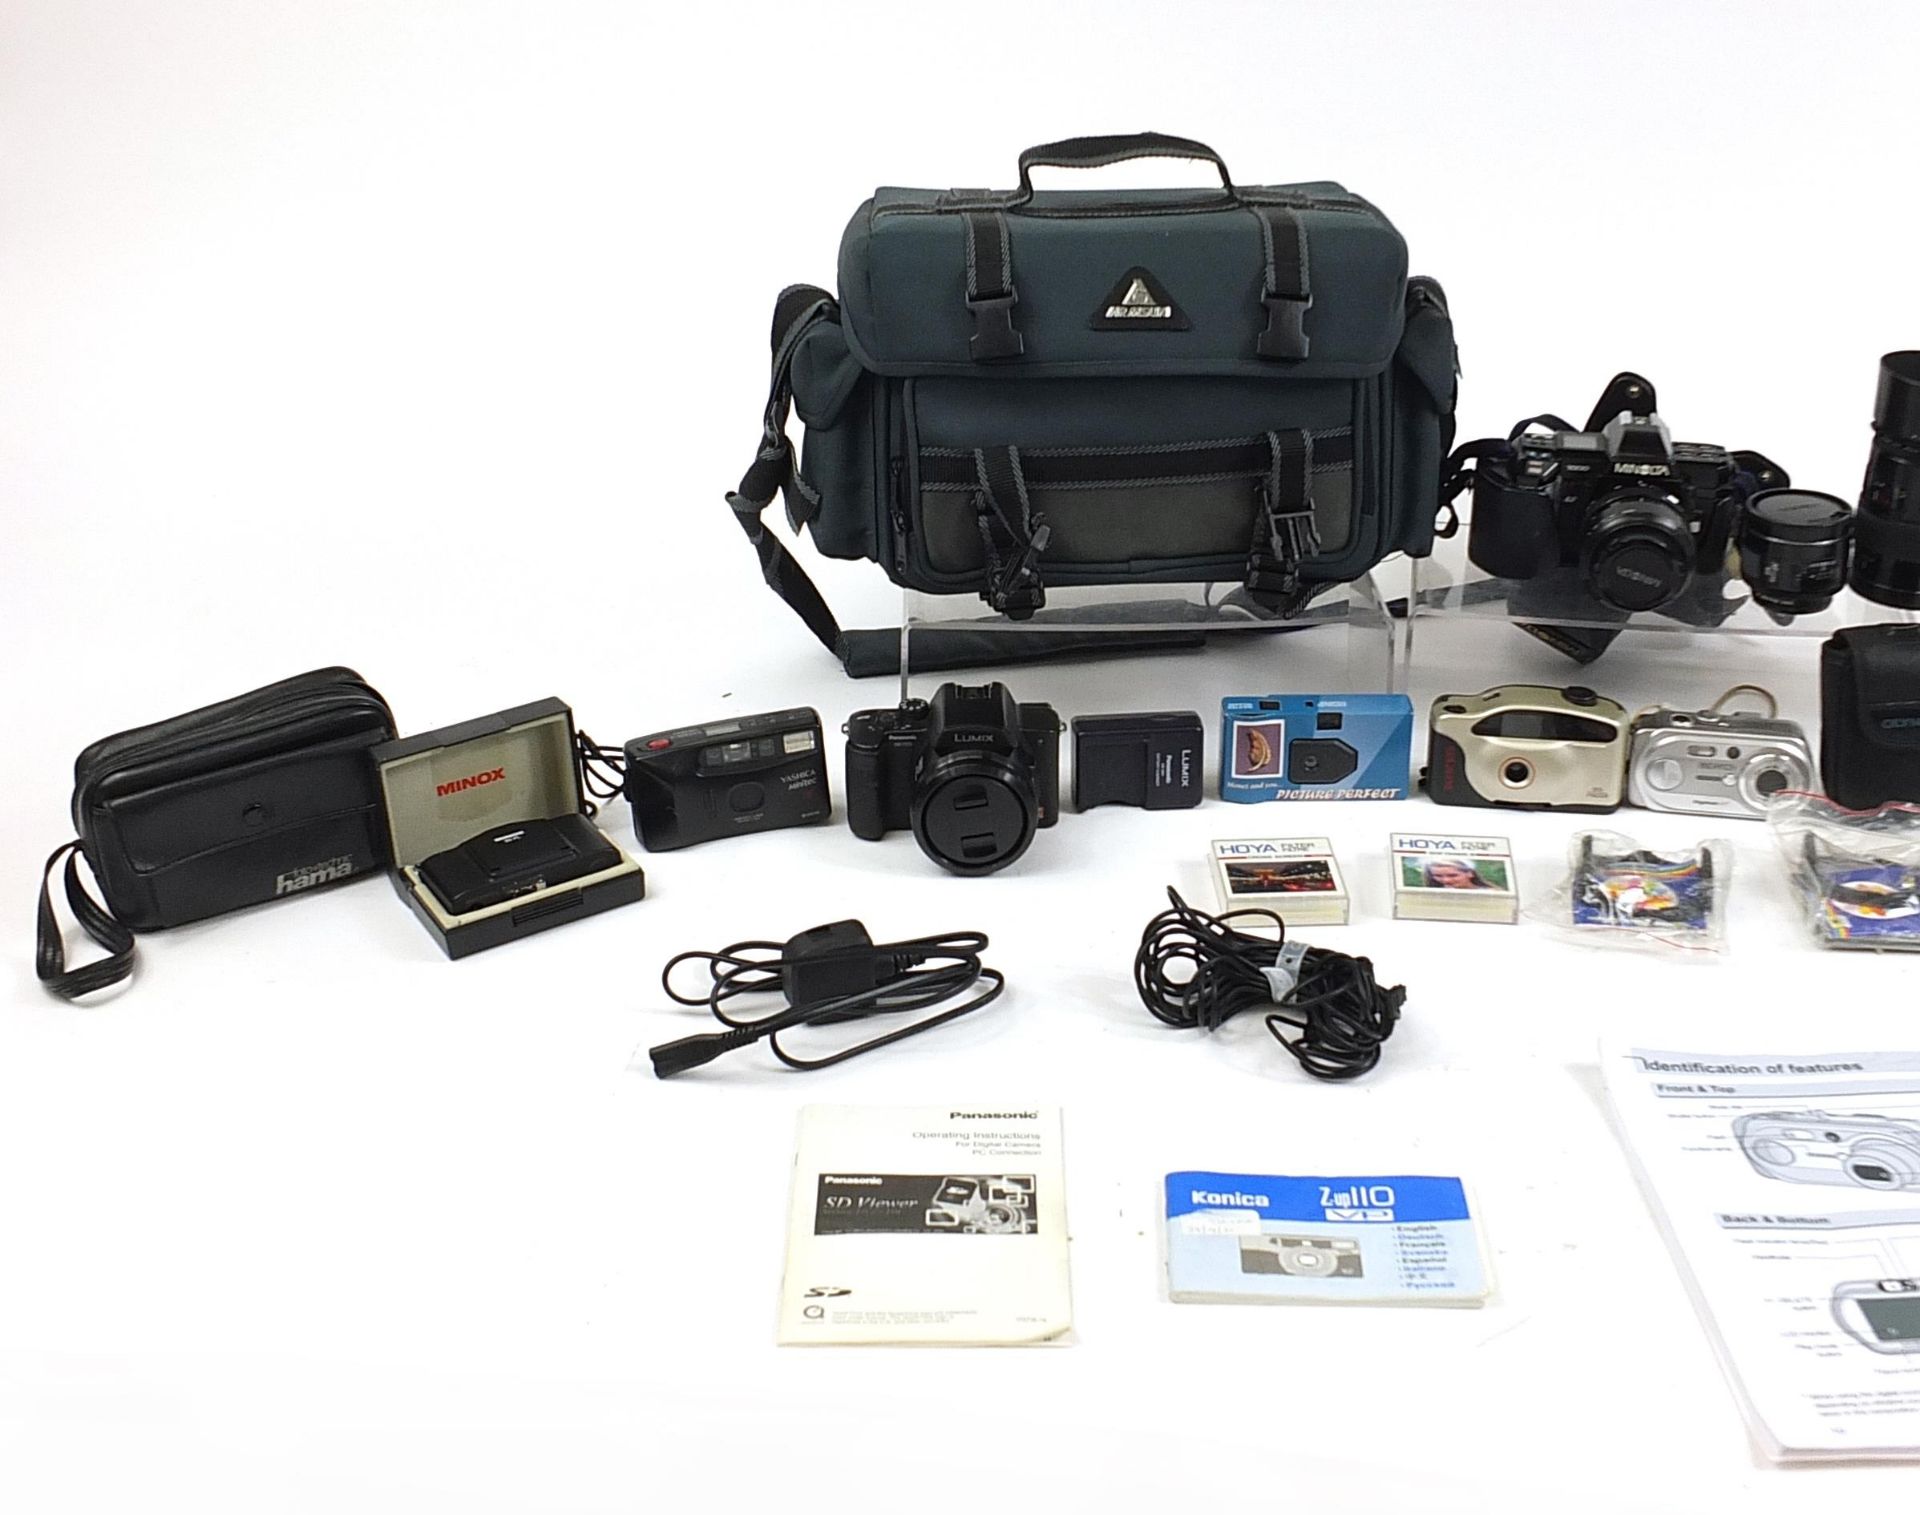 Vintage and later cameras, lenses and accessories including Minolta 7000 and Panasonic Lumix DMC- - Image 2 of 3